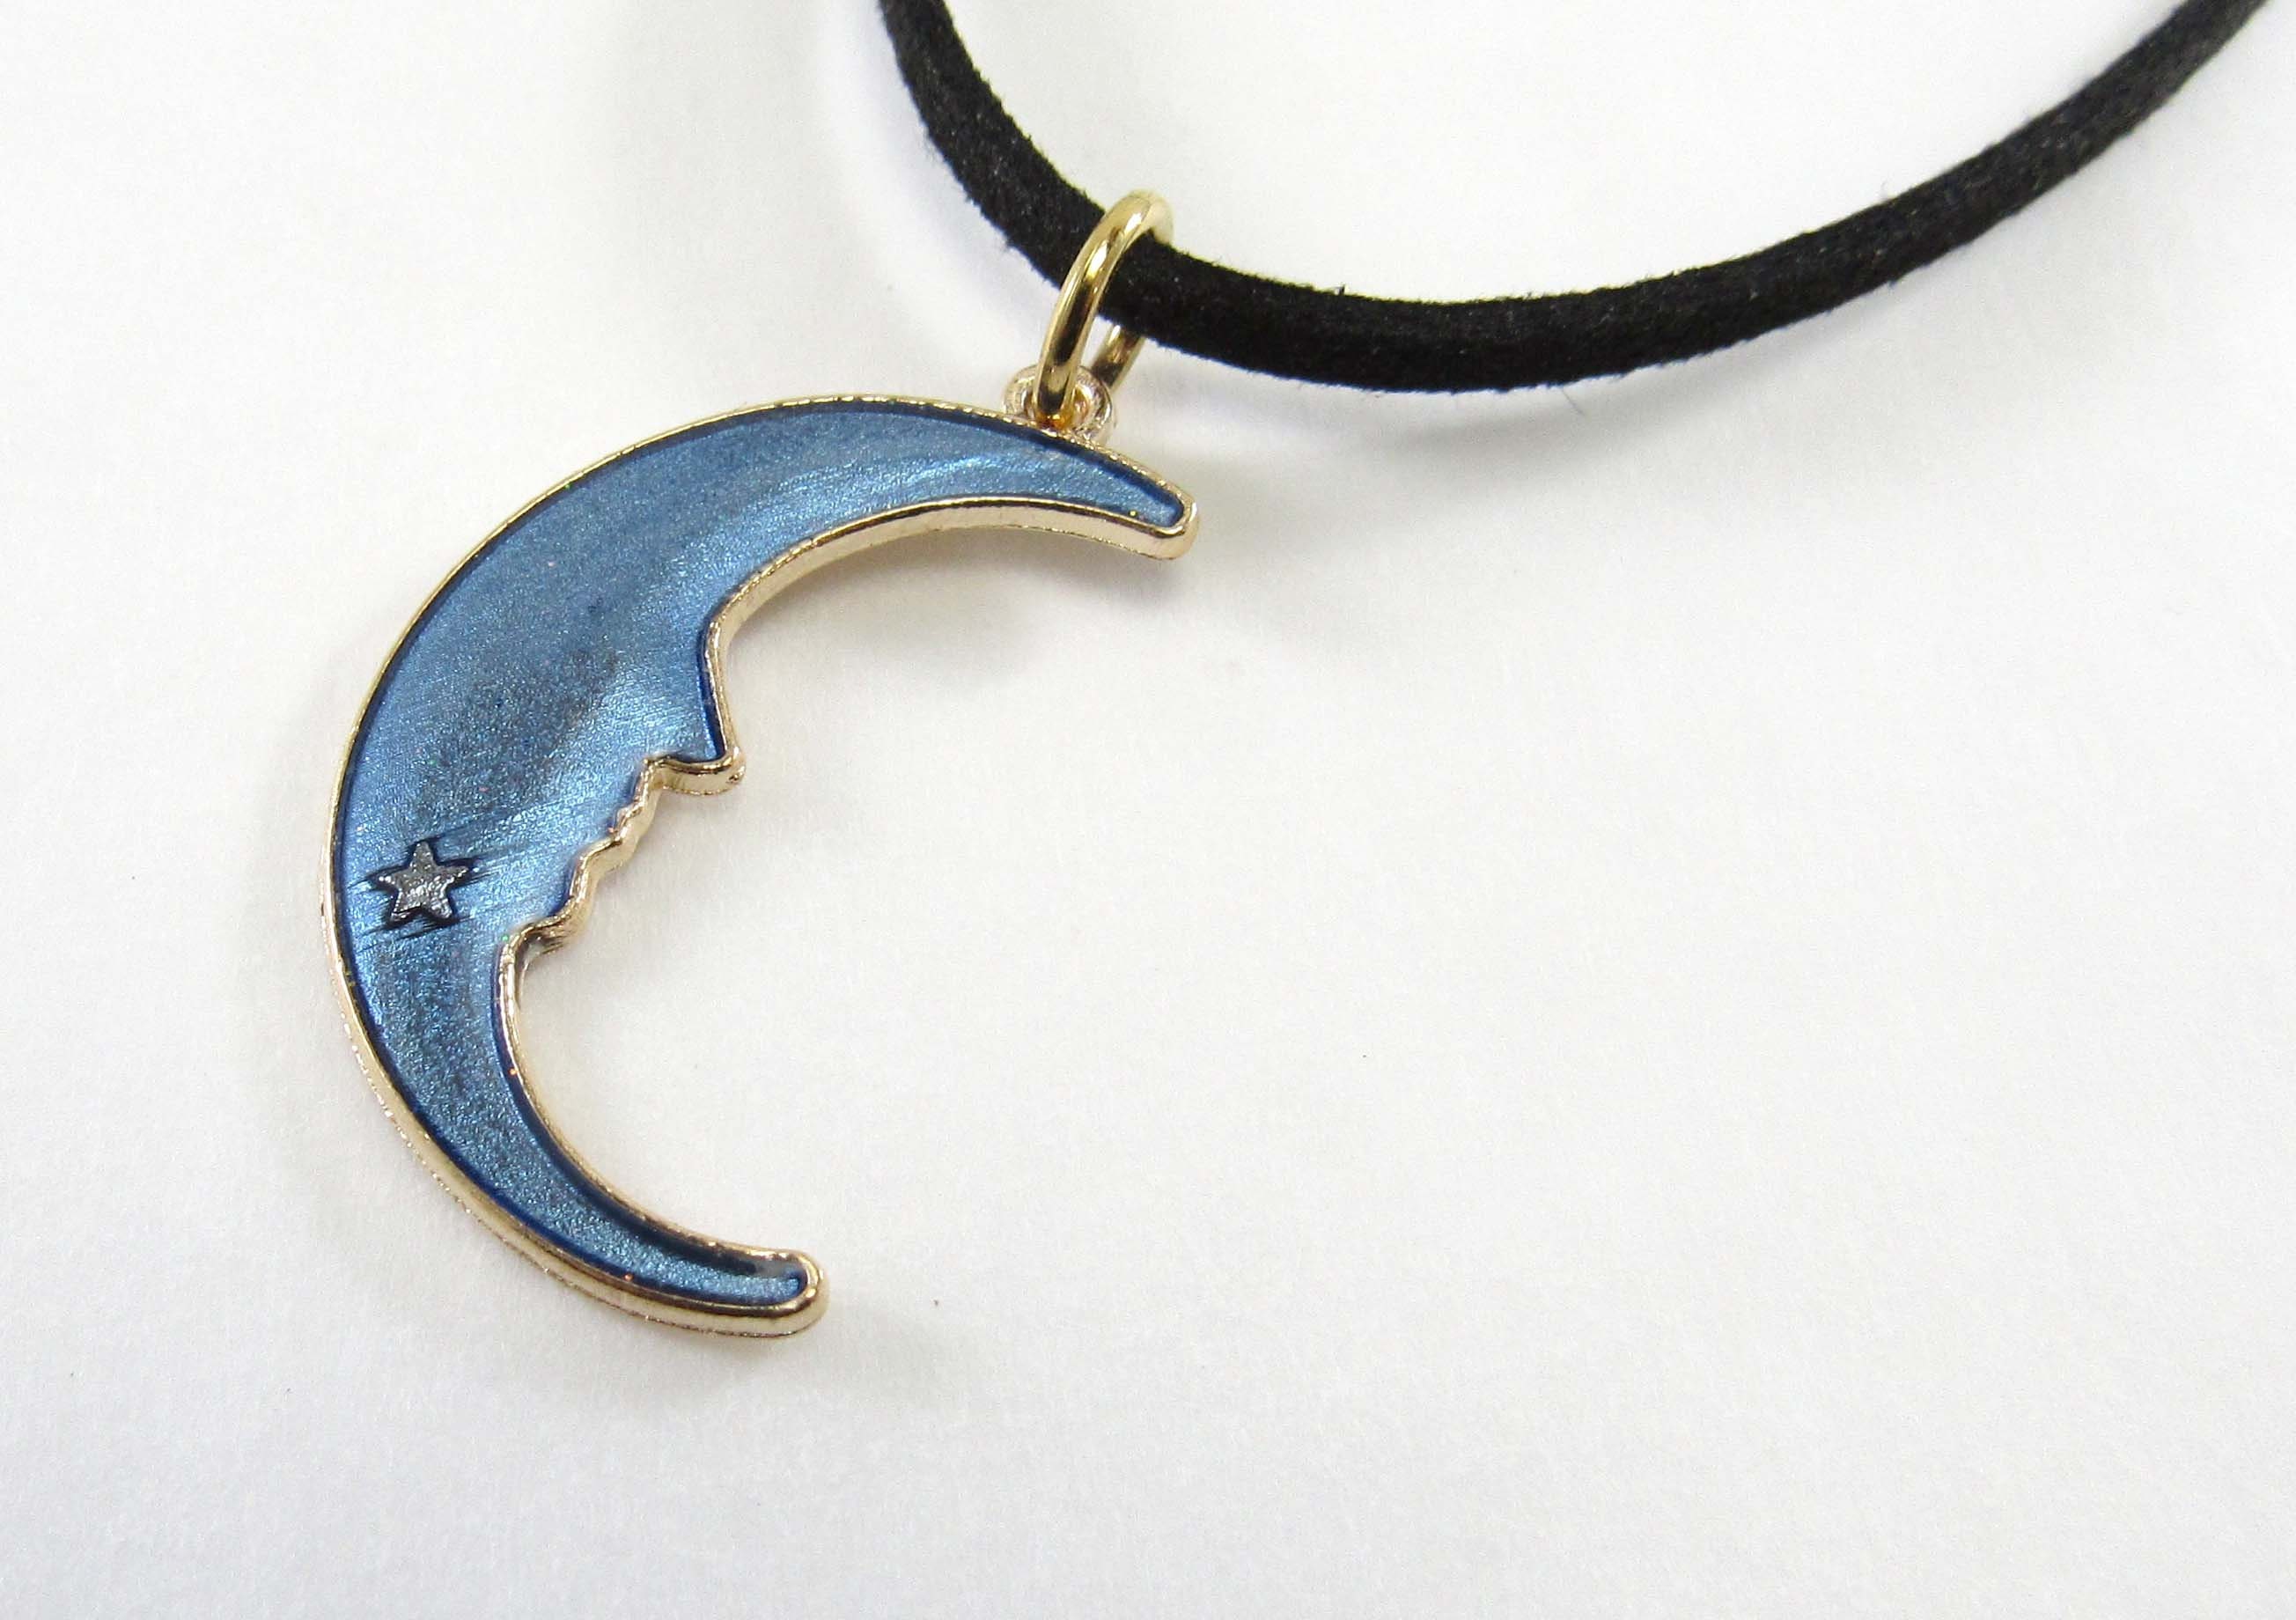 Alpha Male Manila - Half moon necklace for men, men's necklace with a  silver double horn pendant, silver chain, gift for him, upside down crescent  moon necklace. Php1,700 | Facebook